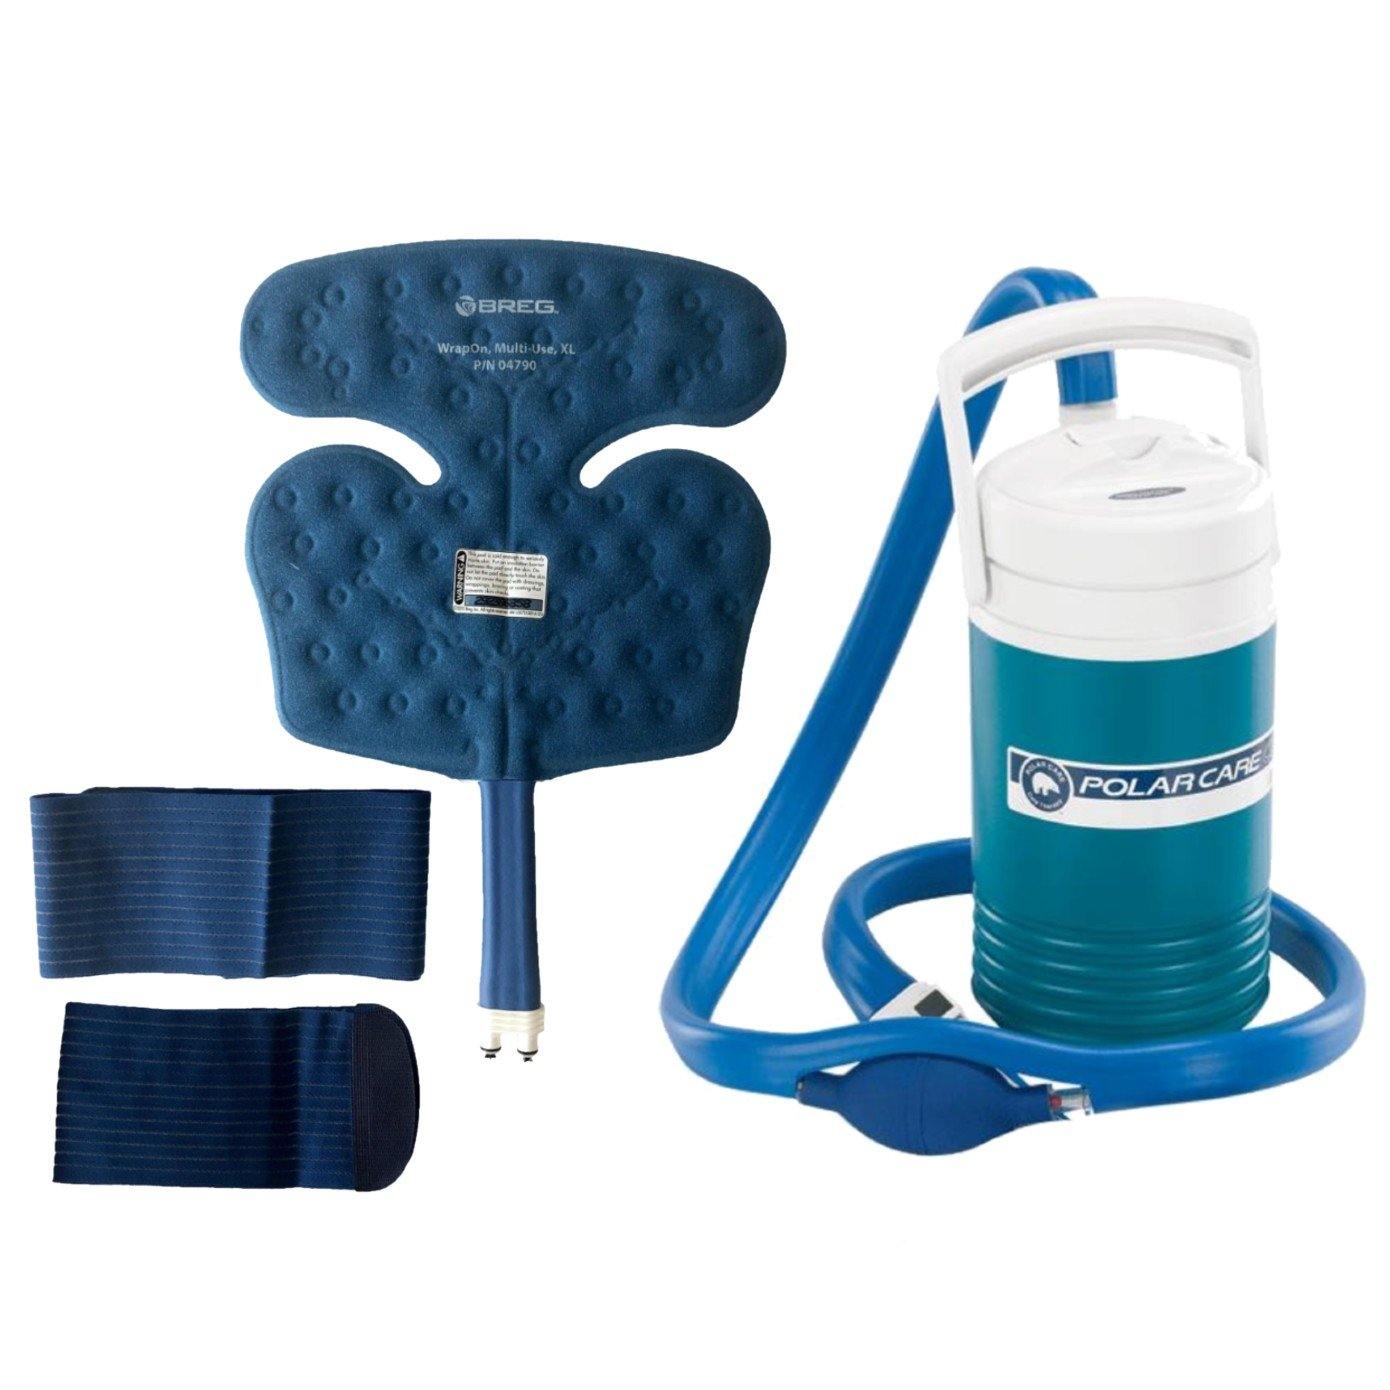 Breg® Polar Care Cub System w/ Wrap-On Pads - 04690 Breg® Polar Care Cub System w/ Wrap-On Pads - undefined by Supply Physical Therapy Breg, Cold Therapy Units, Combos, Cub